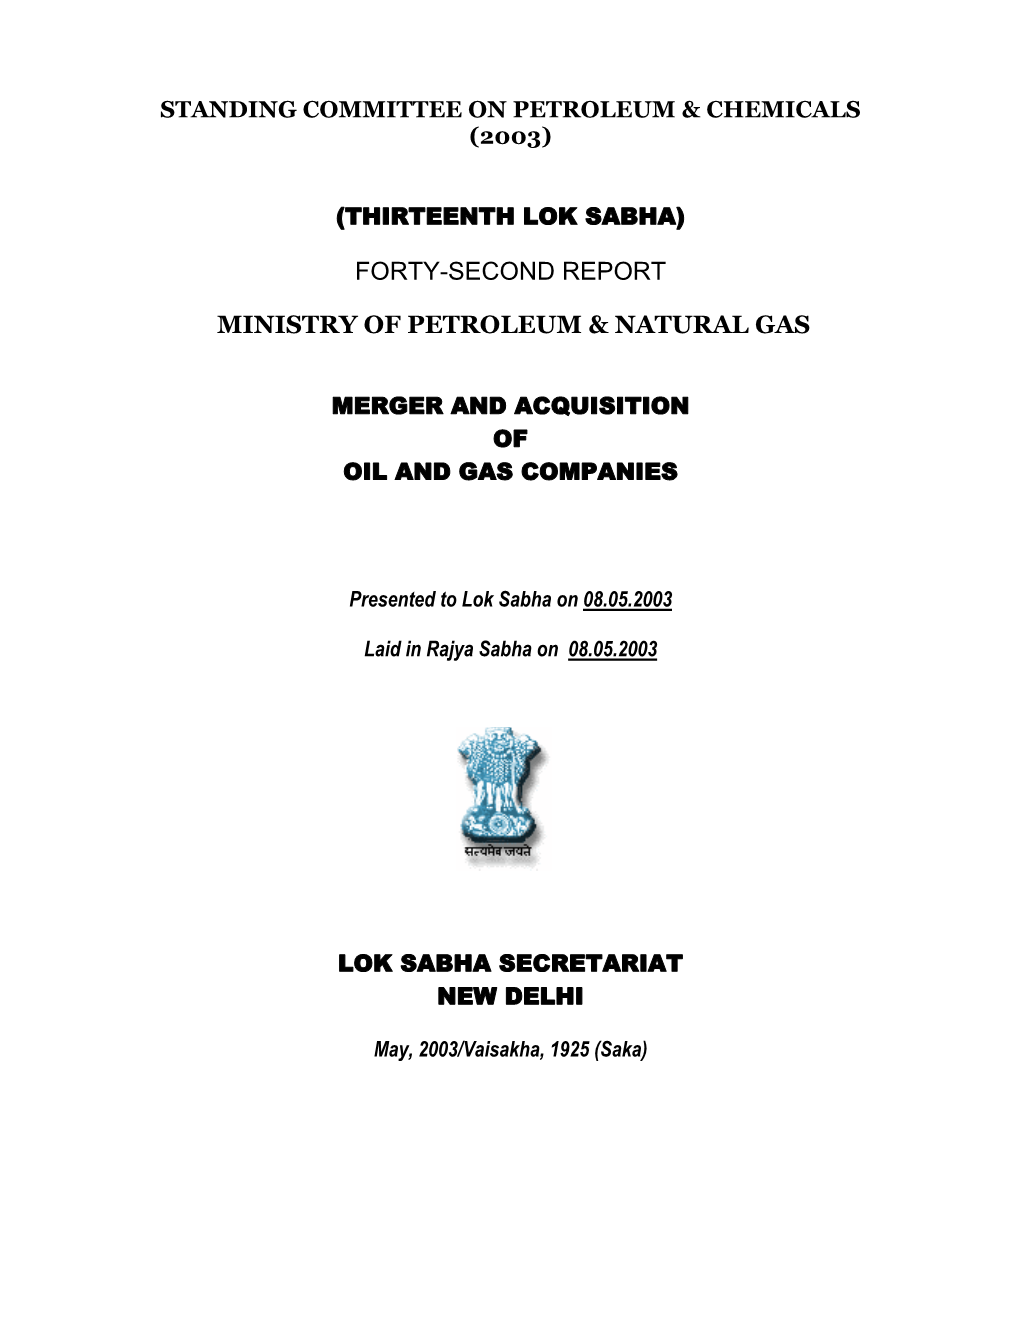 Forty-Second Report Ministry of Petroleum & Natural